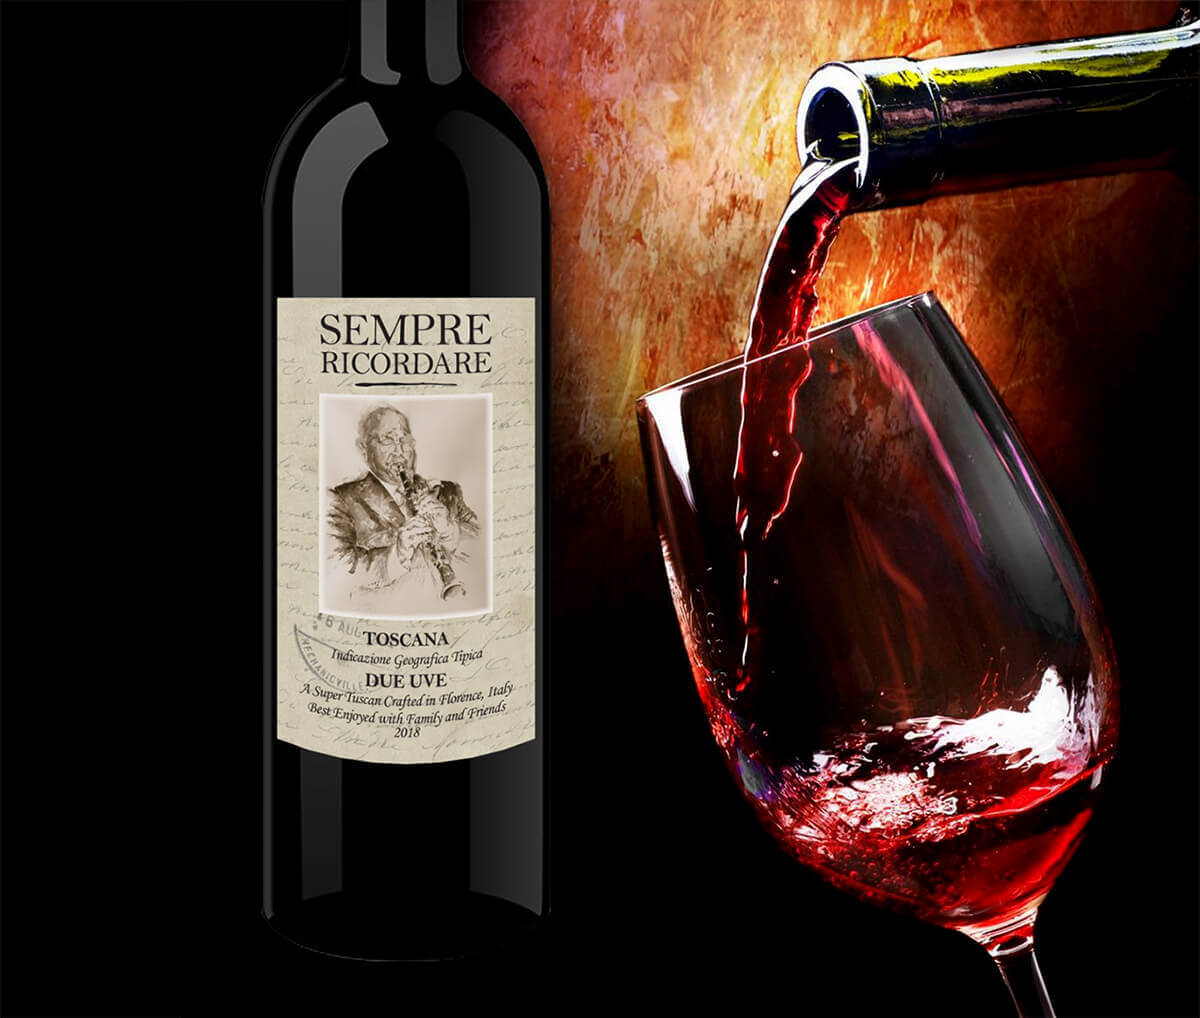 Bottle of Sempre Ricordare wine and wine being poured into a glass